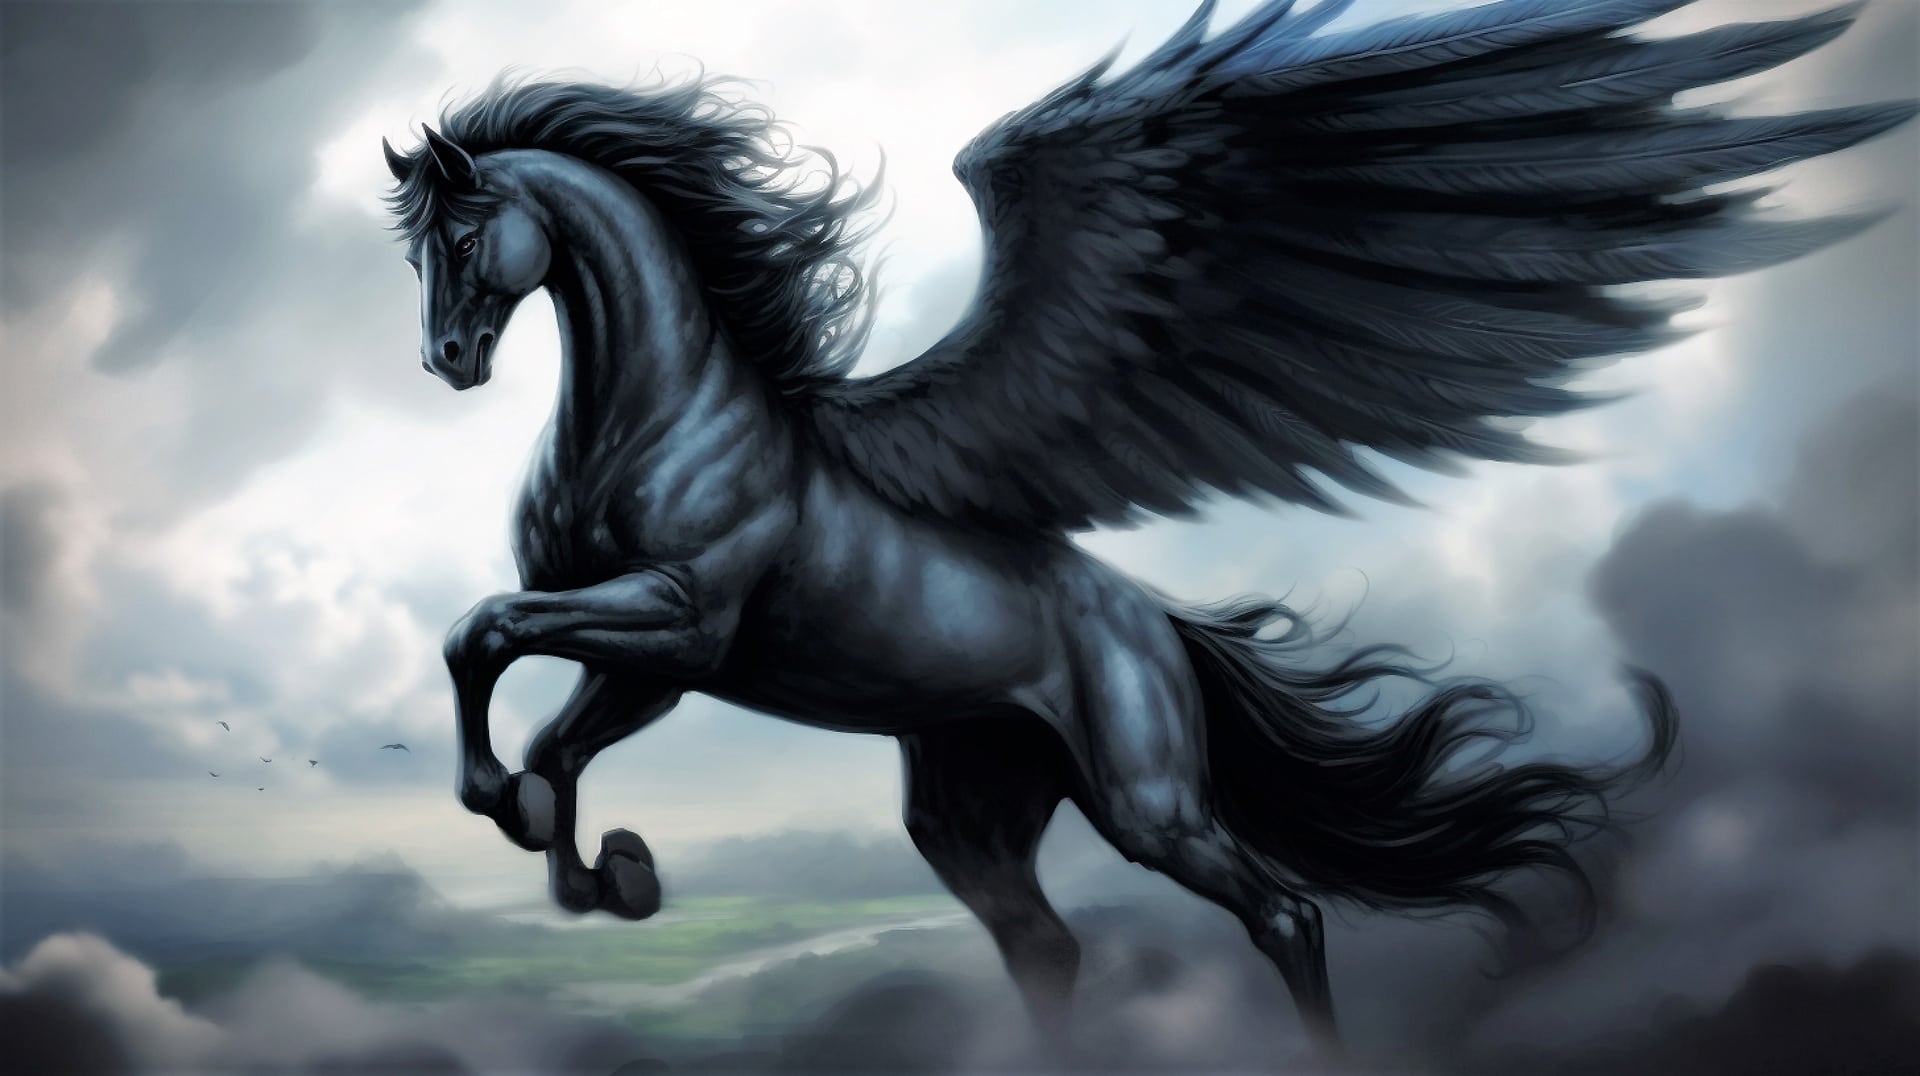 Free picture: Majestic muscular black Pegasus jumping in clouds